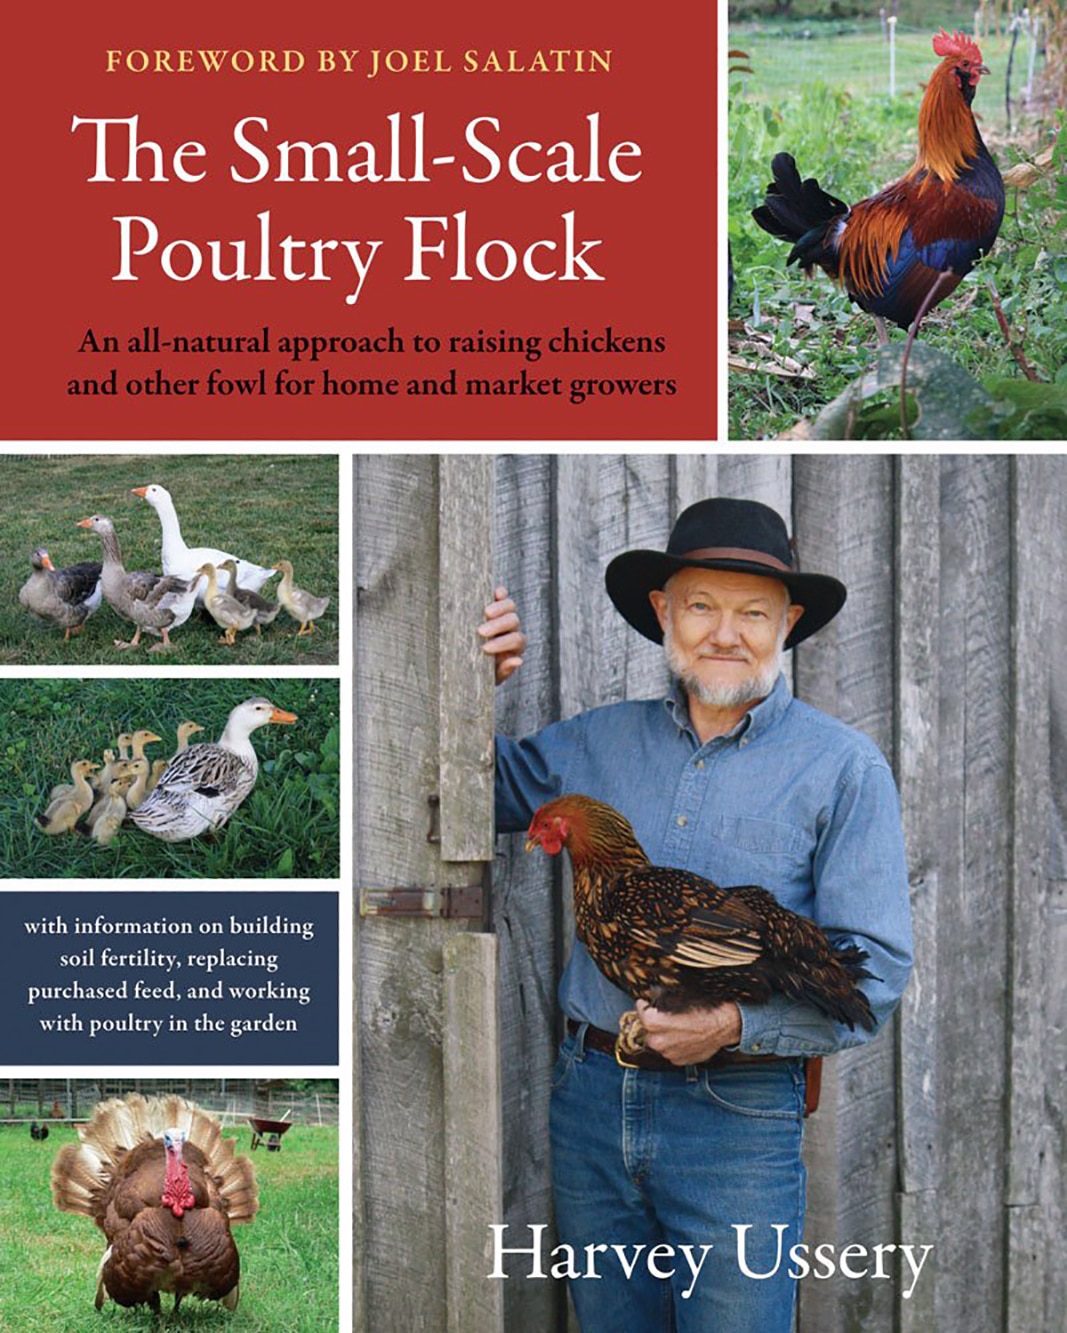 The Small-Scale Poultry Flock review